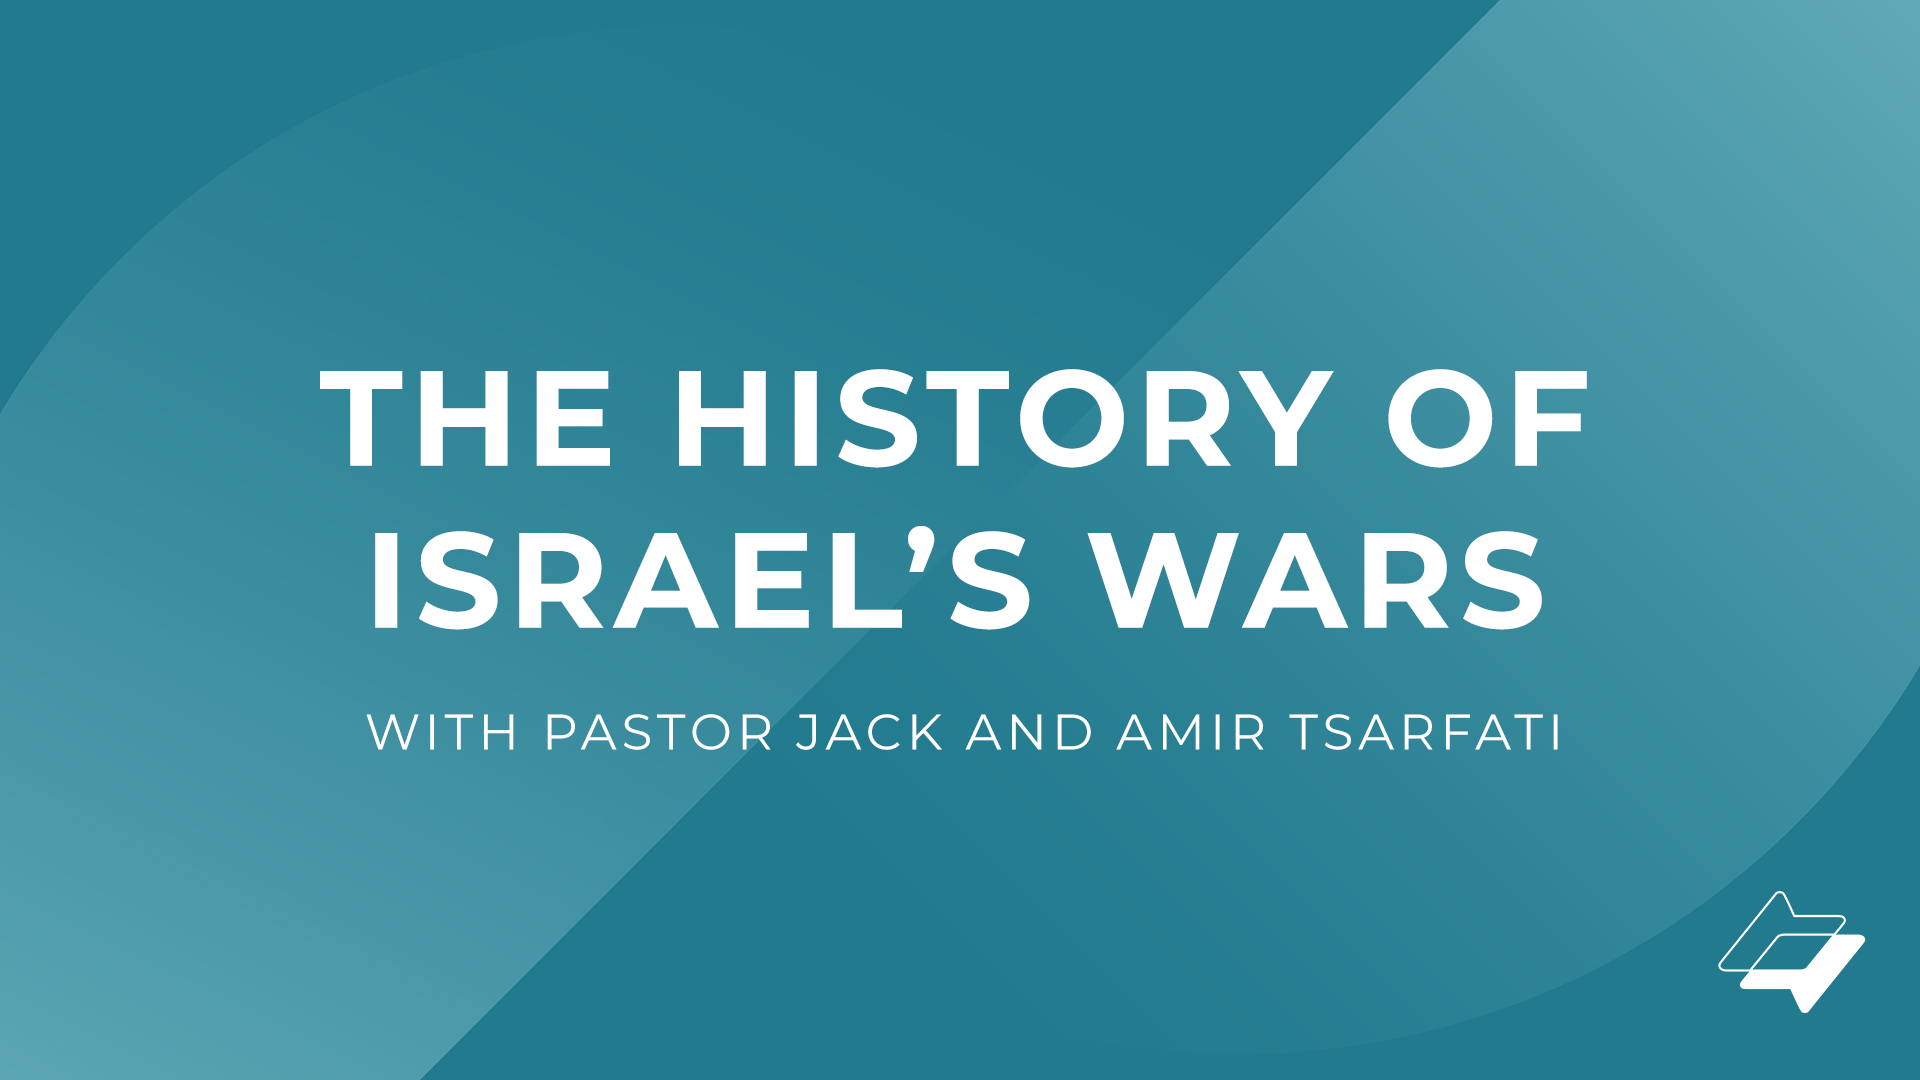 The History of Israel’s Wars with Pastor Jack and Amir Tsarfati